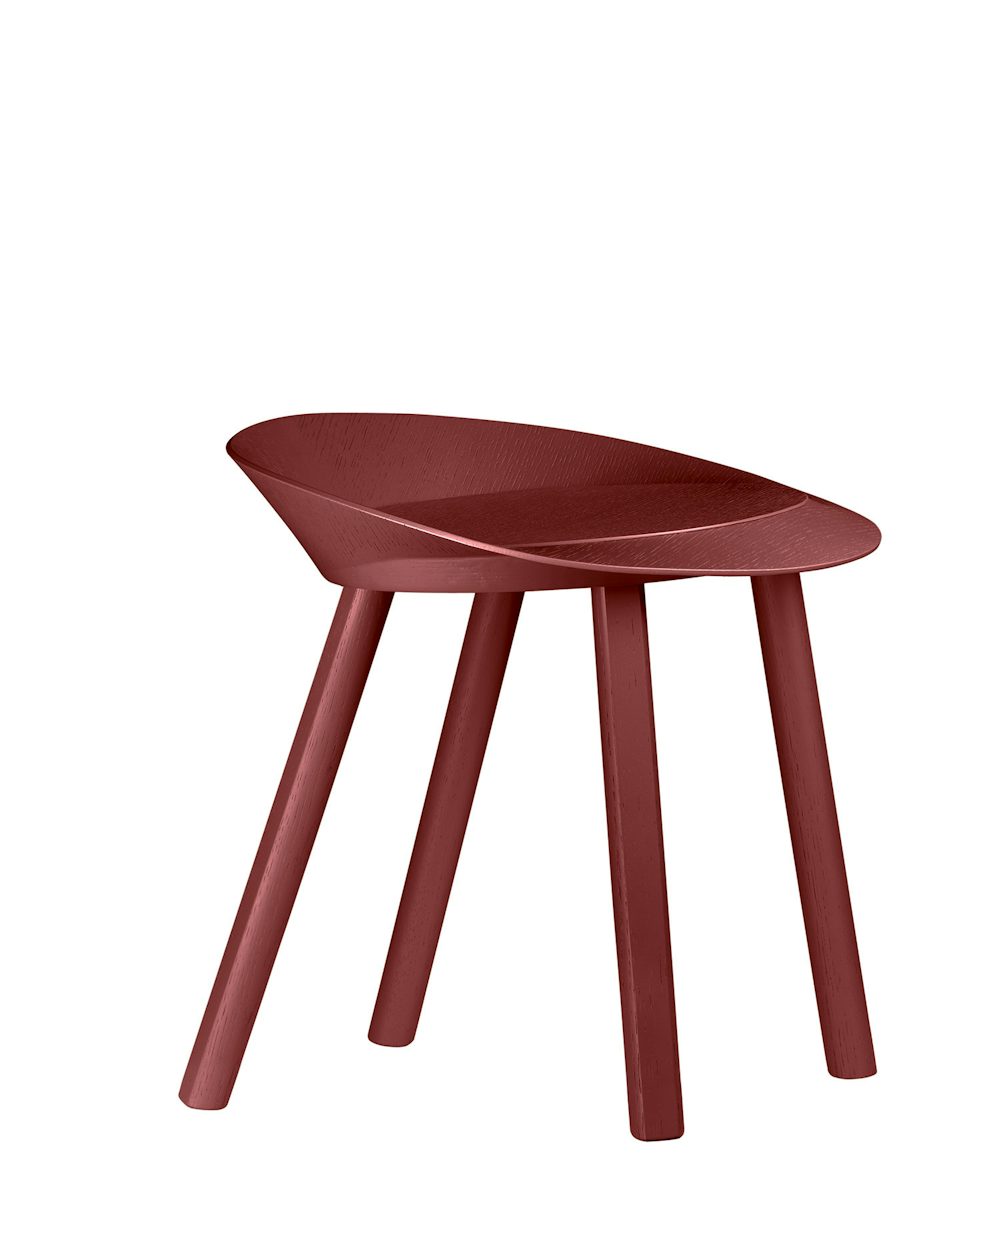 e15 mr collins stool in oxide red